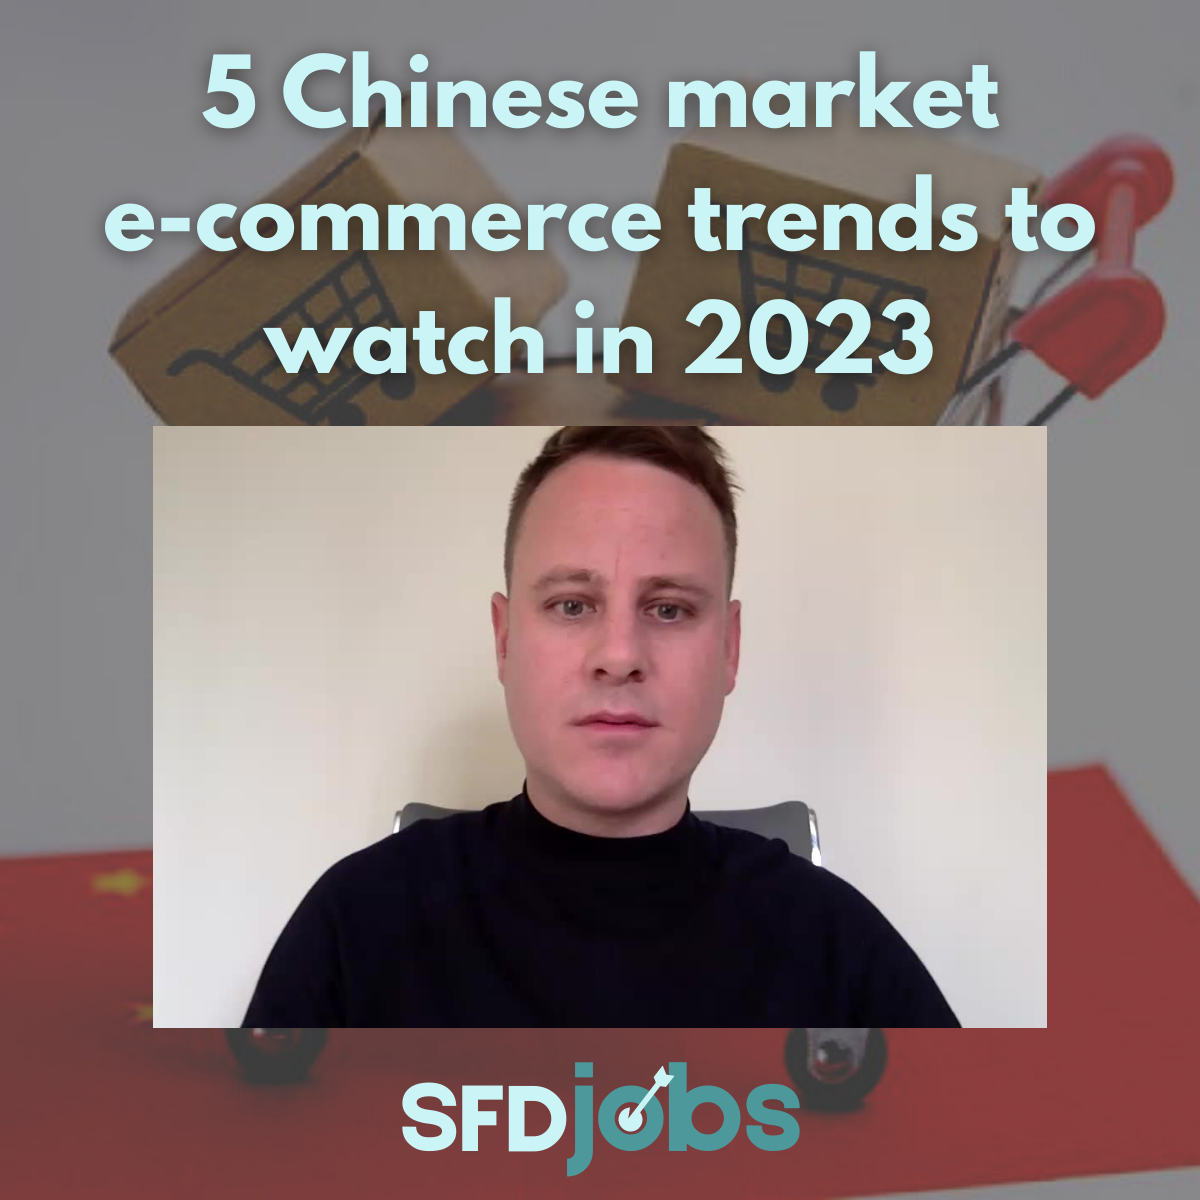 5 Chinese market e-commerce trends to watch in 2023